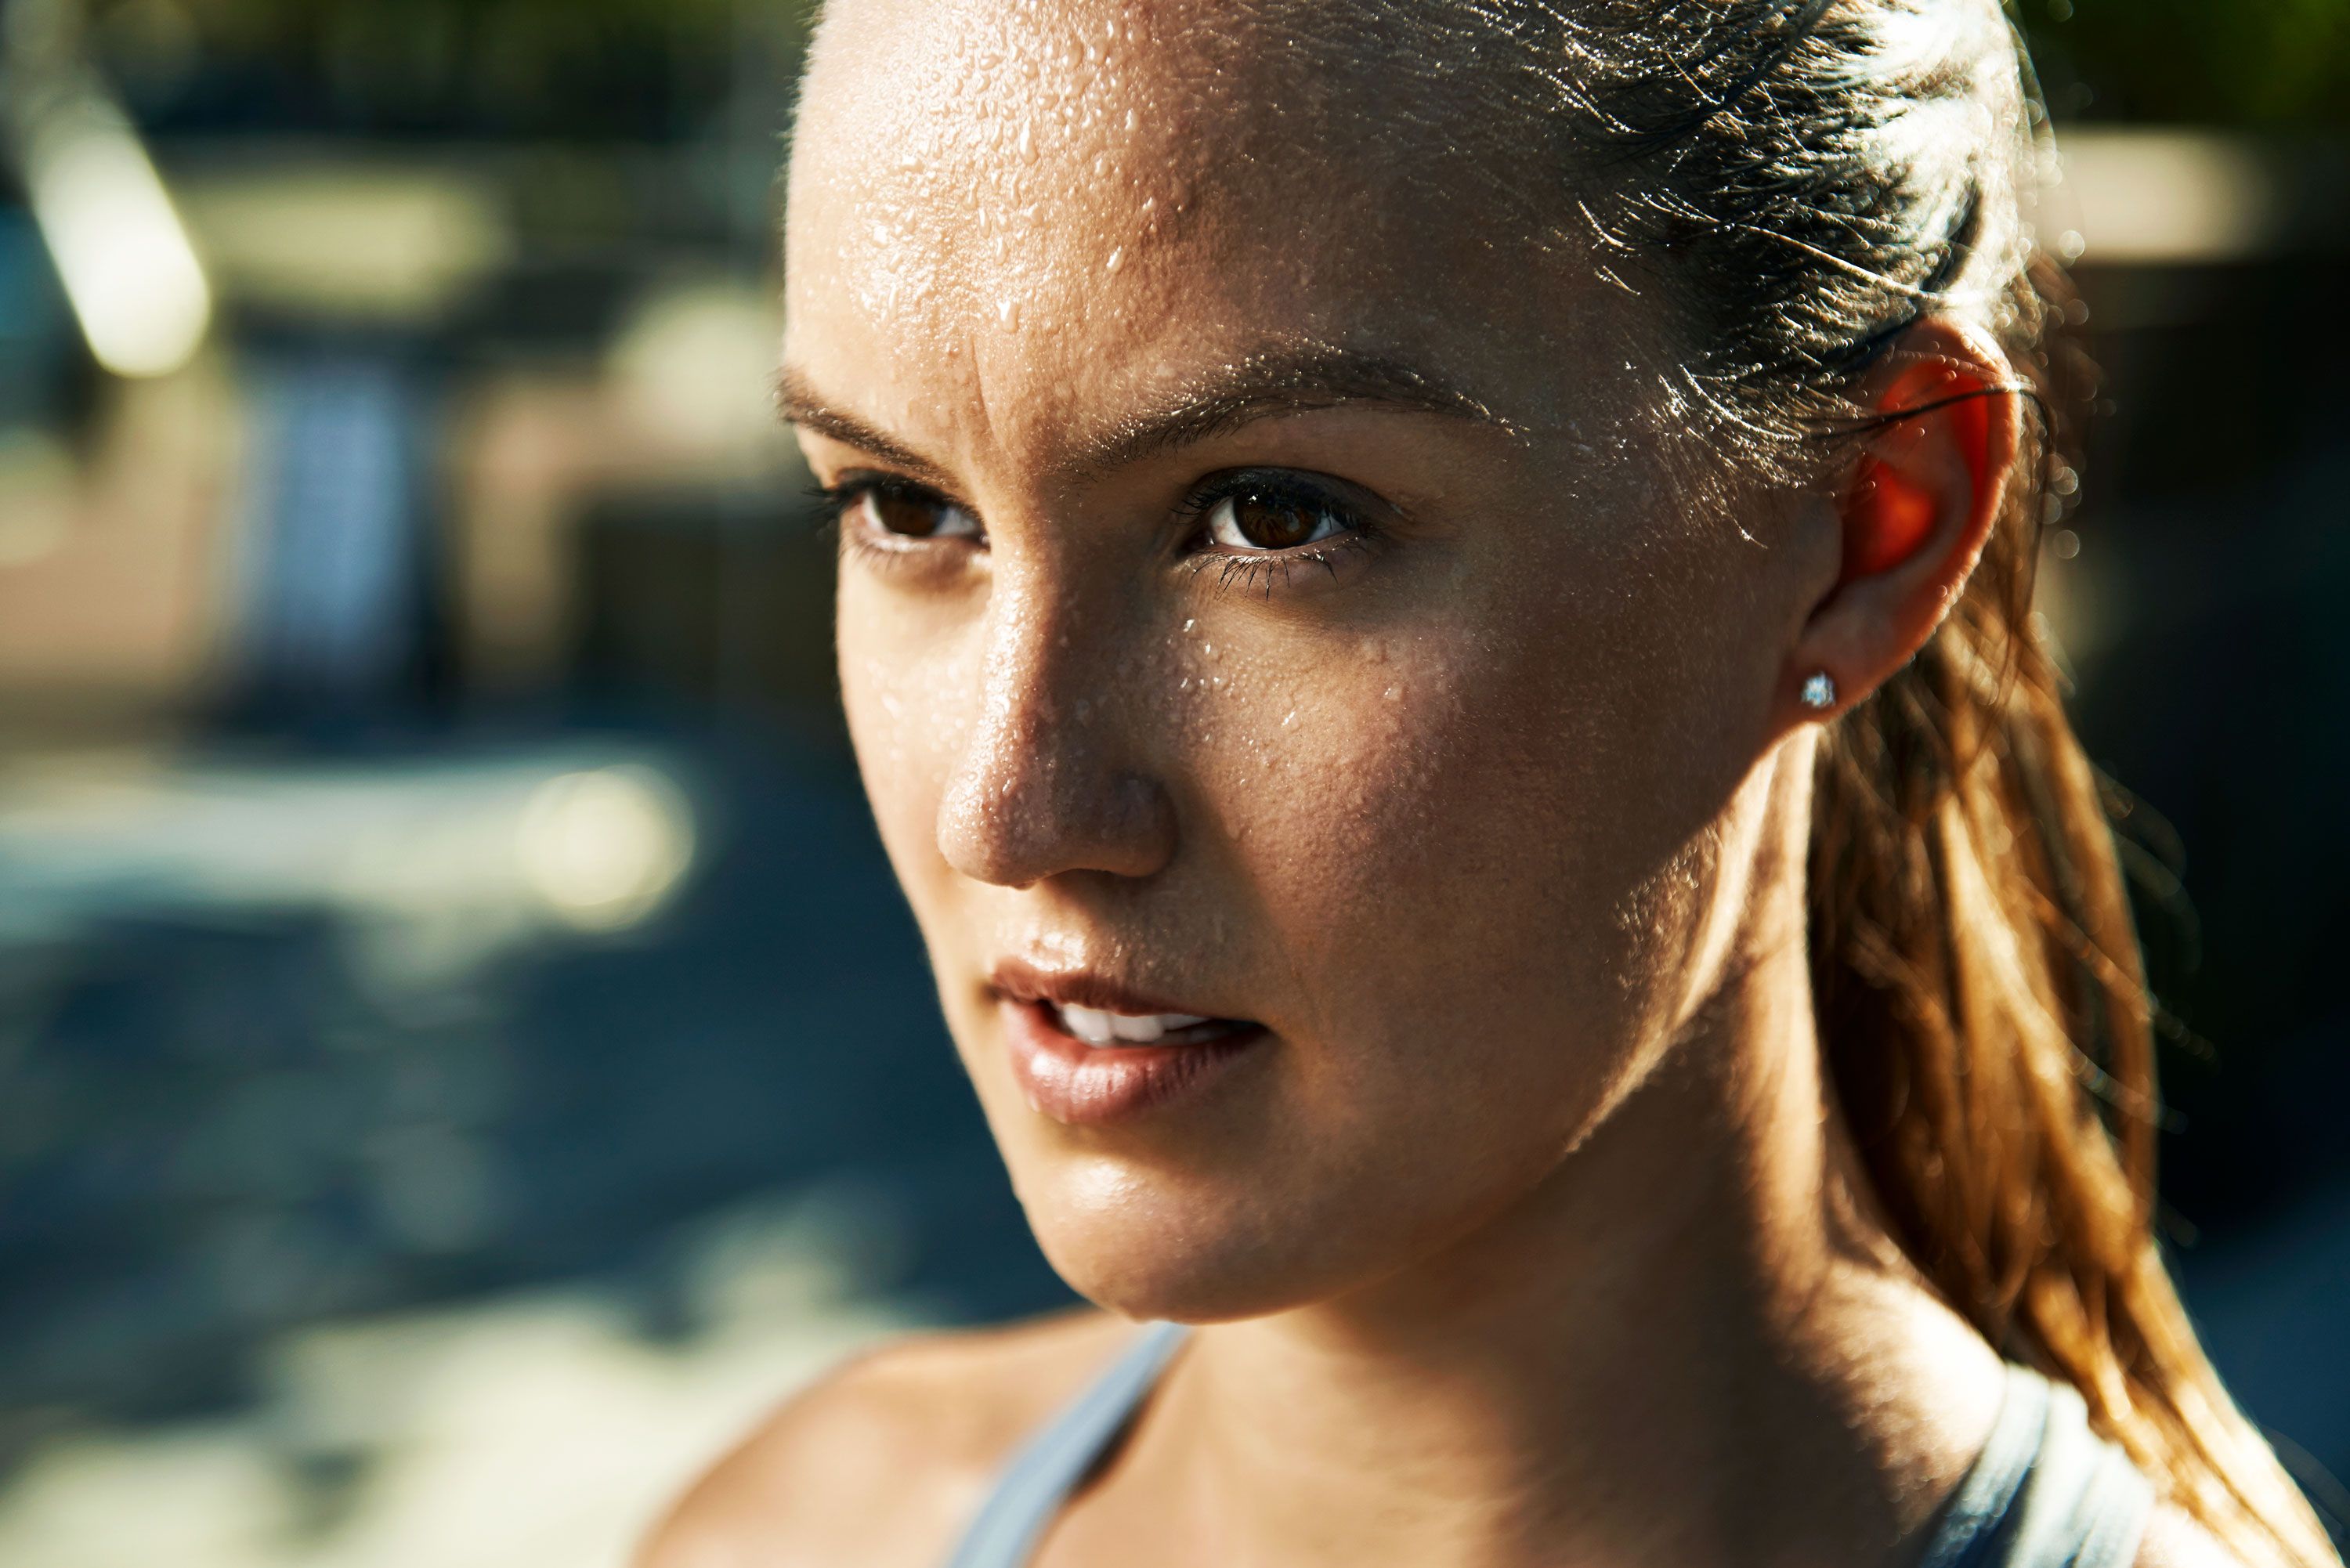 This Intense Workout Will Make You Sweat Buckets (In a Good Way)